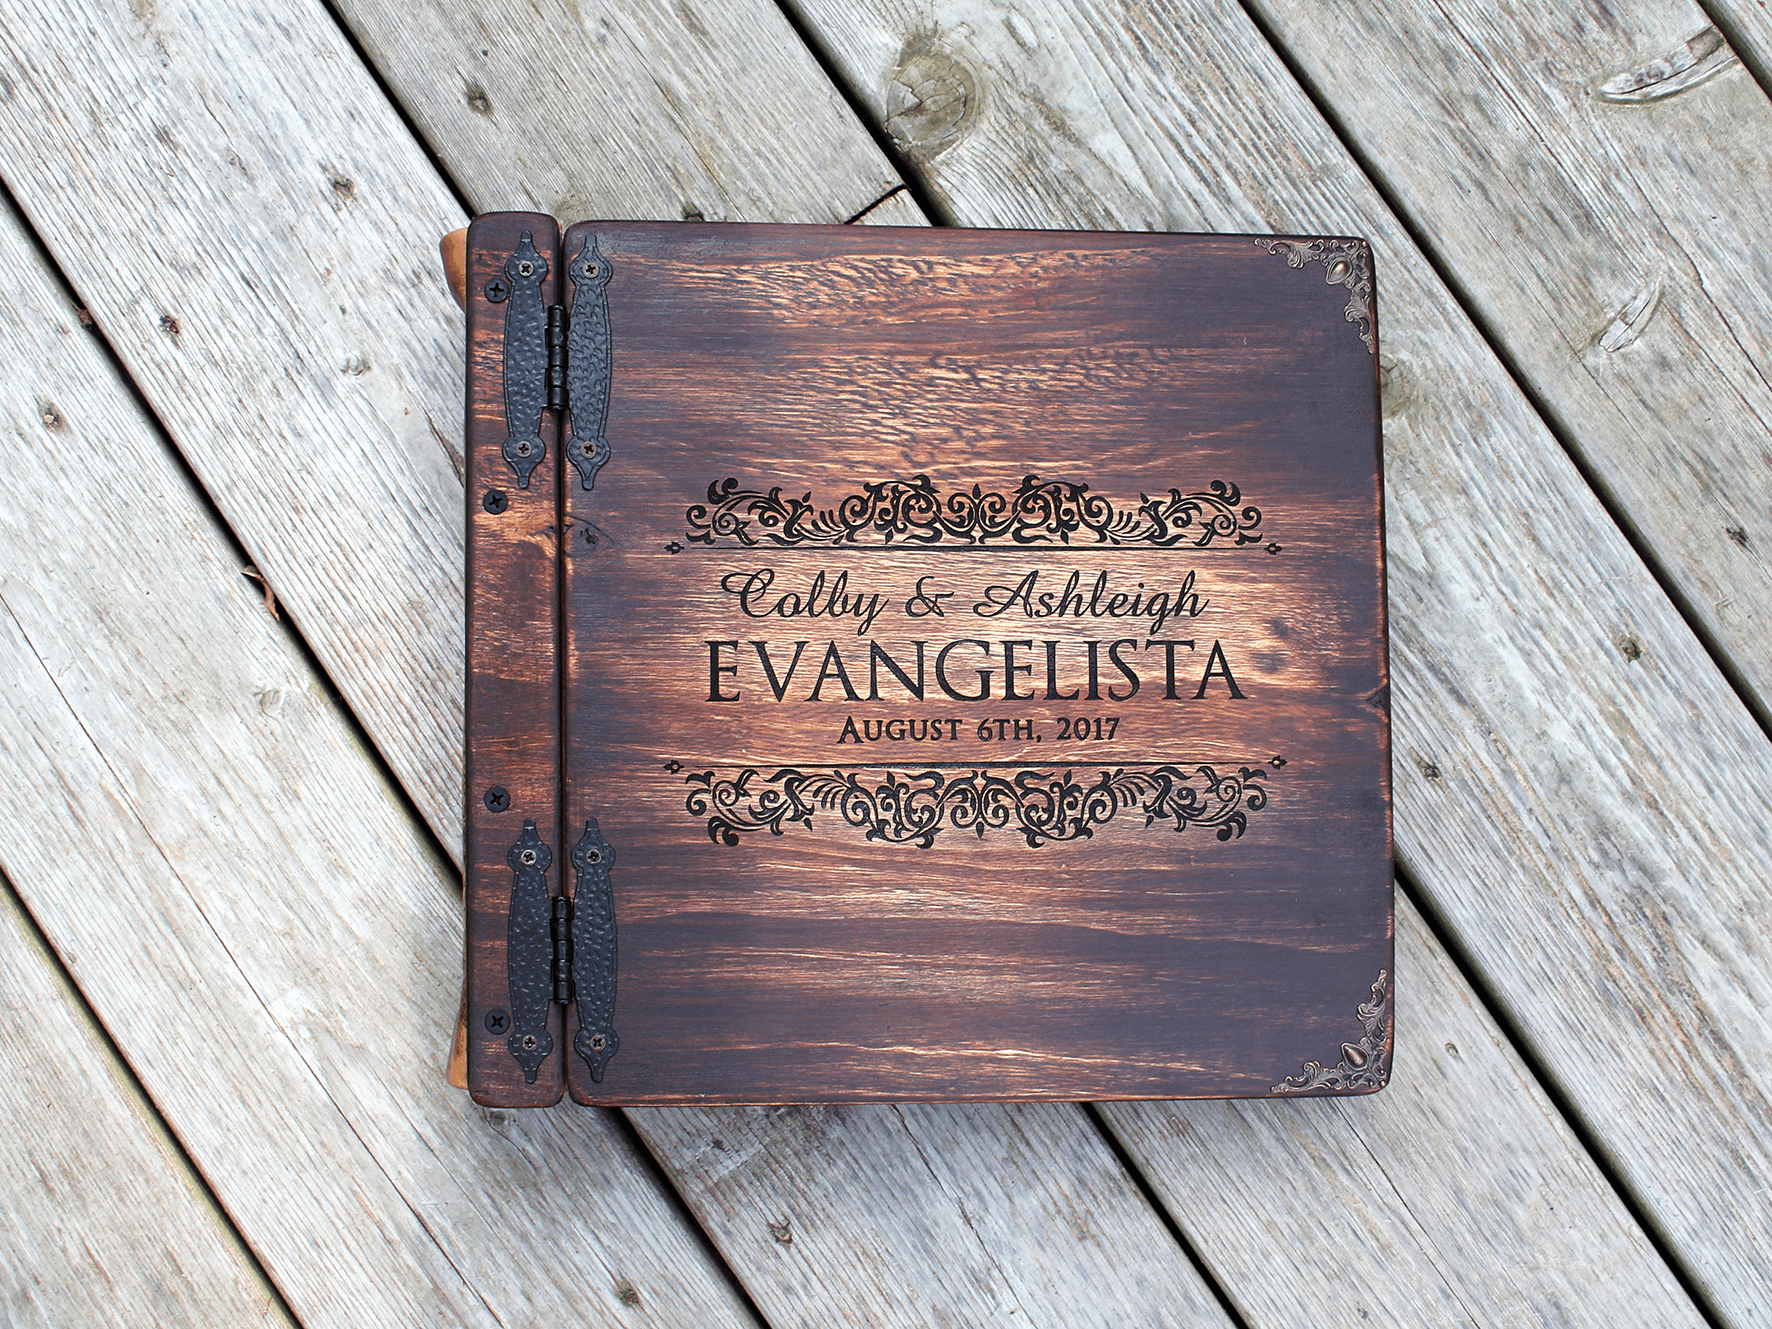 Capture the essence of your love with our custom wedding photo album, engraved by Rustic Engravings and featuring one-of-a-kind artwork by Tylir Wisdom. This exquisite keepsake is perfect for preserving your cherished memories of your special day. Order n